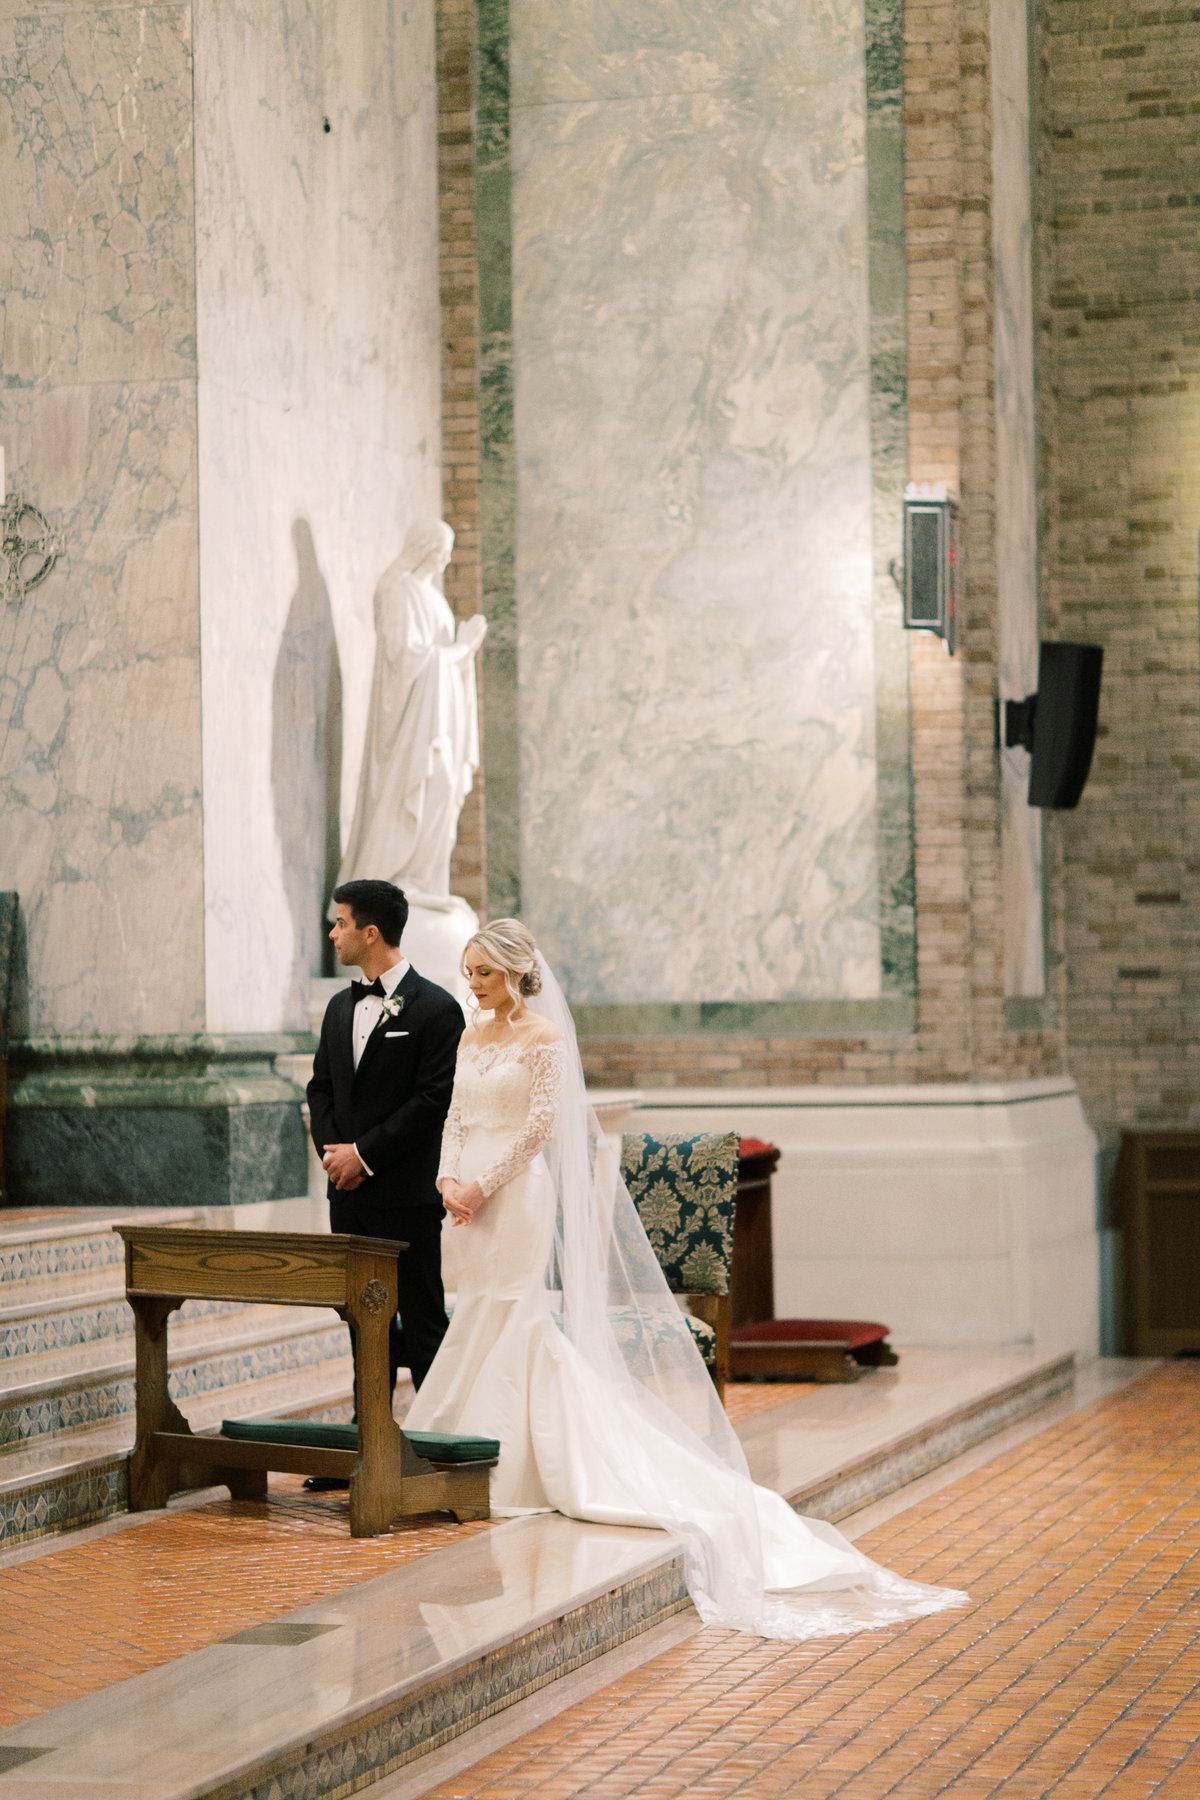 bride and groom at alter getting married in philadelphia church